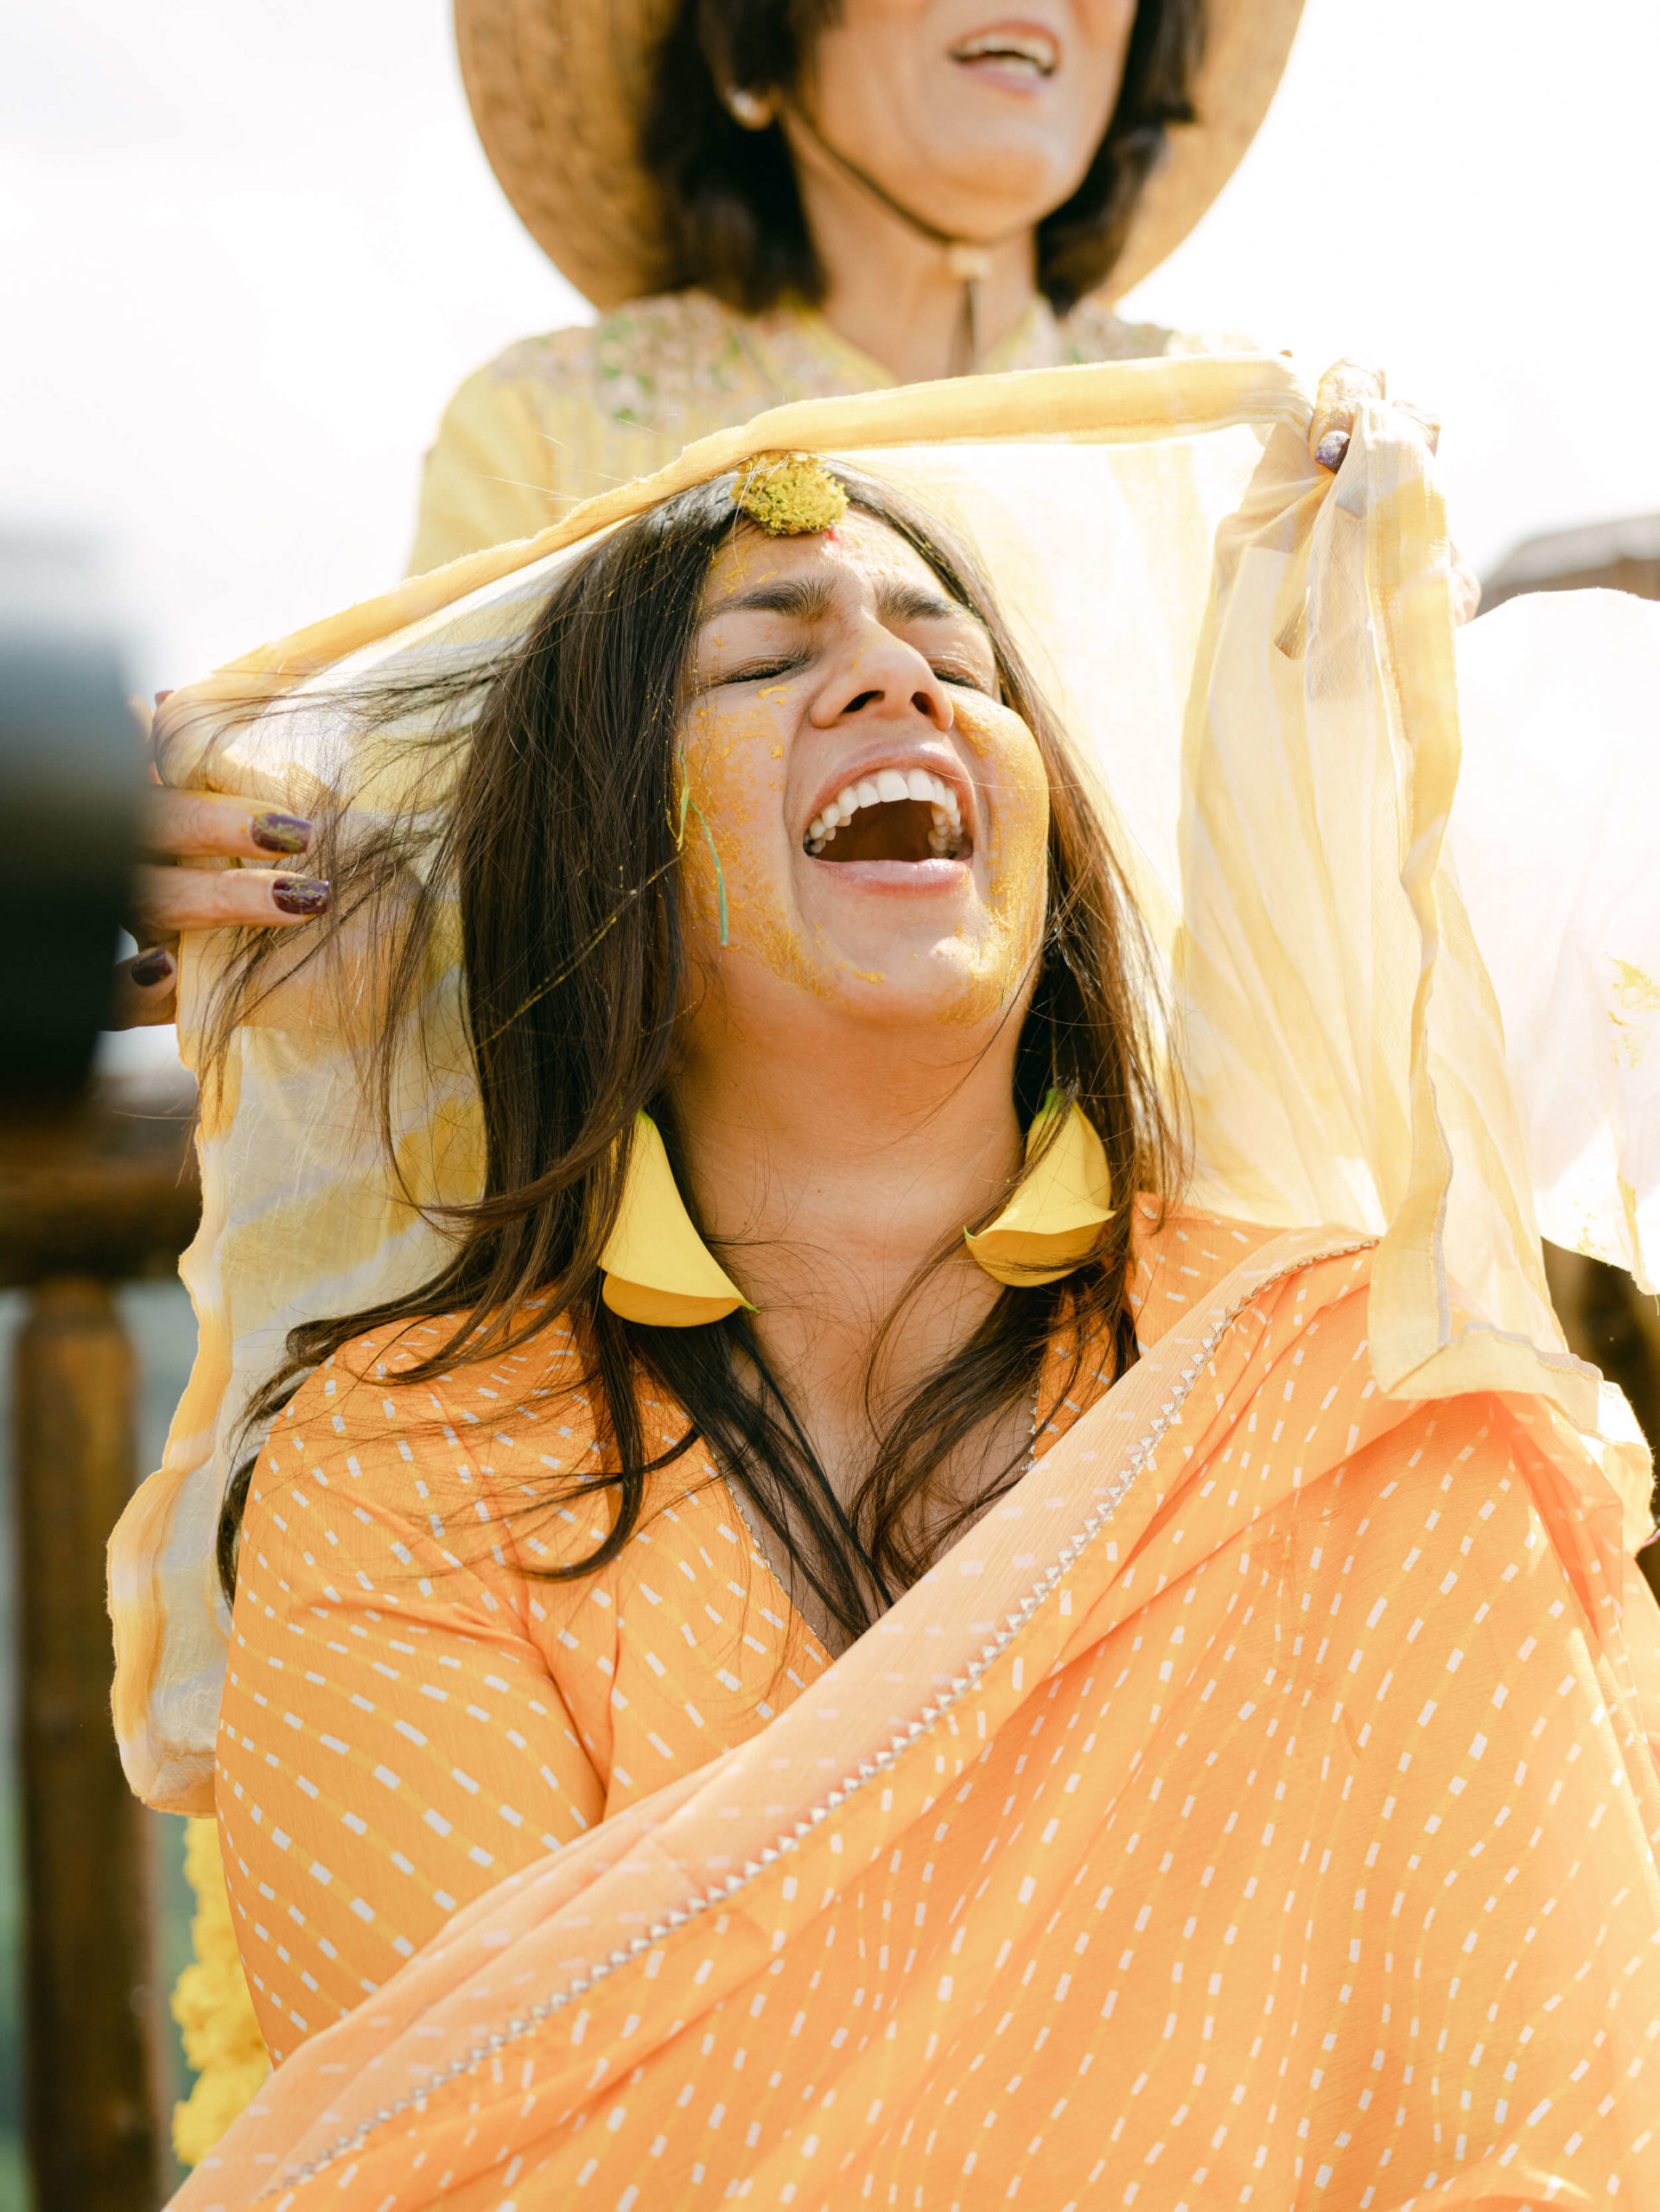 Sapna covered in turmeric paste at Haldi ceremony: an Indian wedding tradition